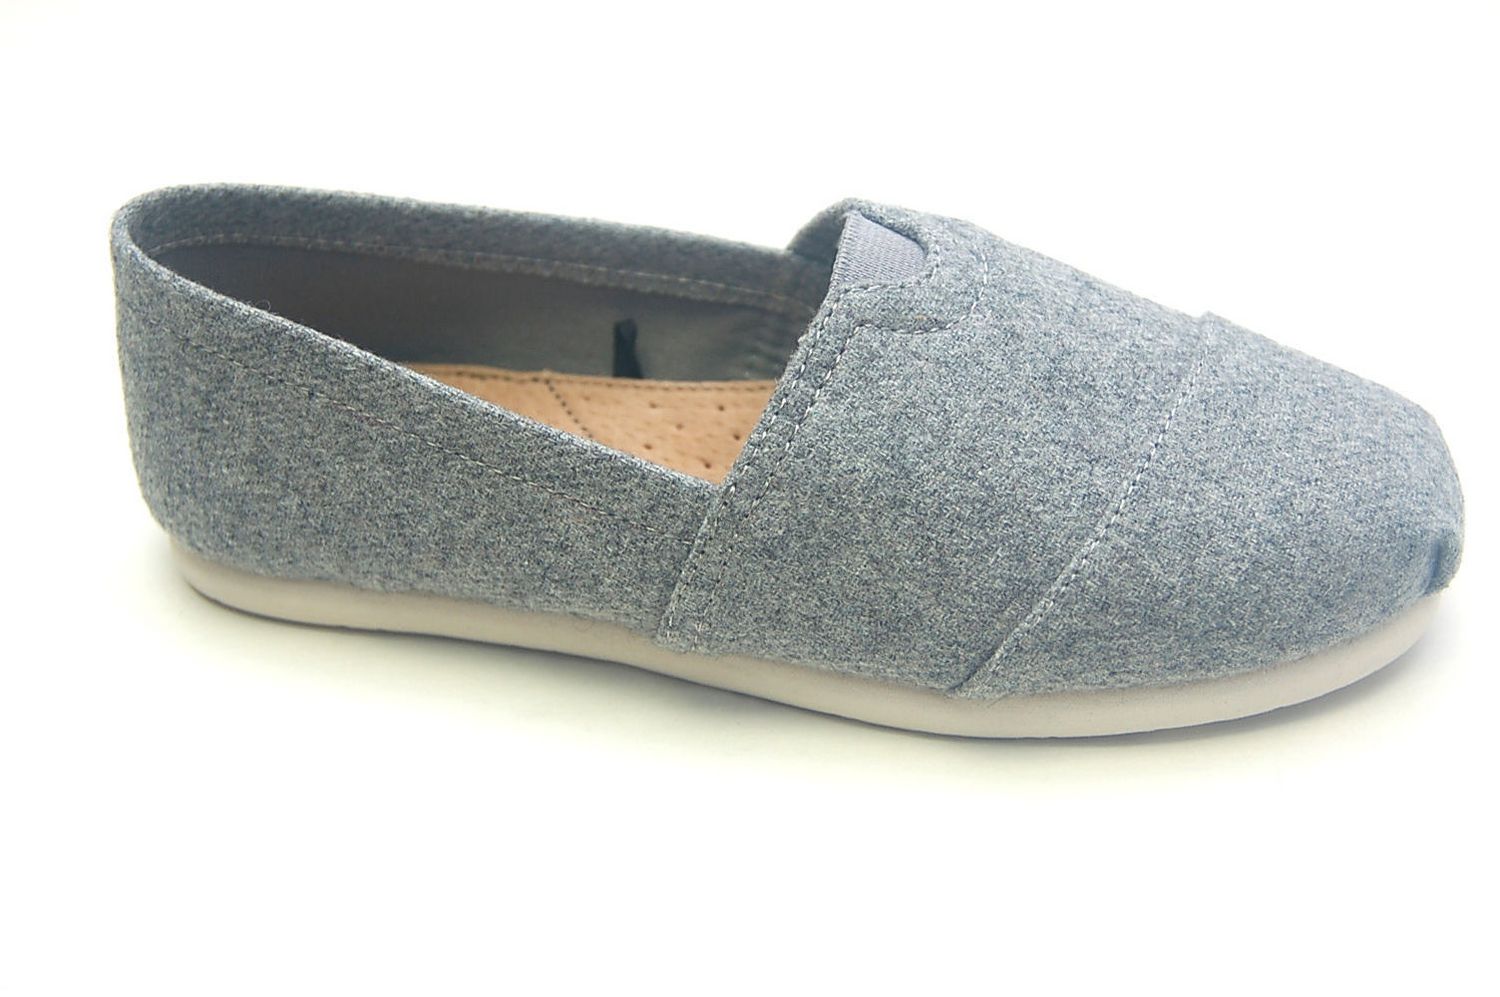 George Women's Slip-On Casual Shoes | Walmart Canada